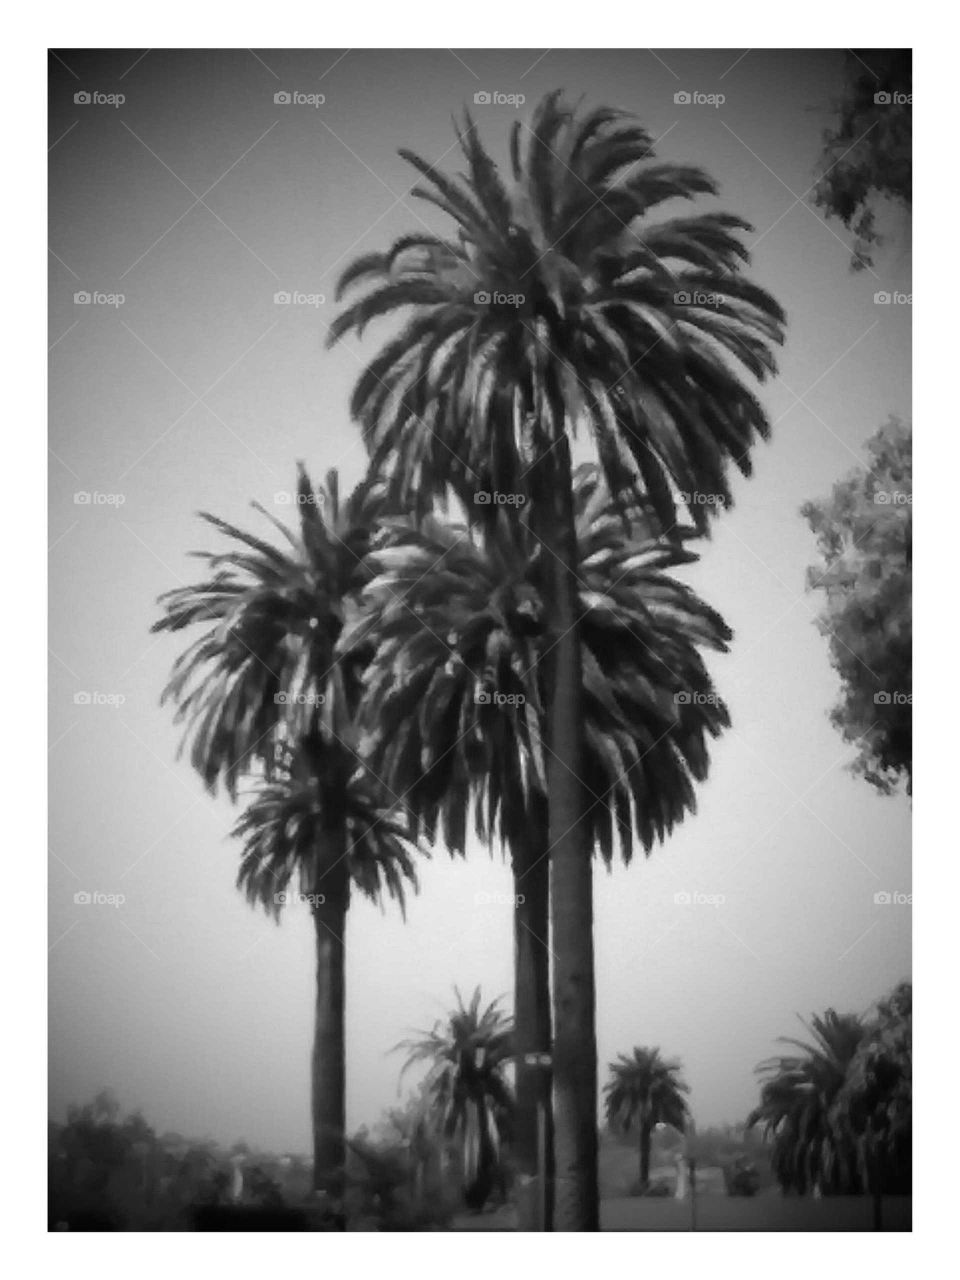 Stylized Photo of Group of Palm Trees